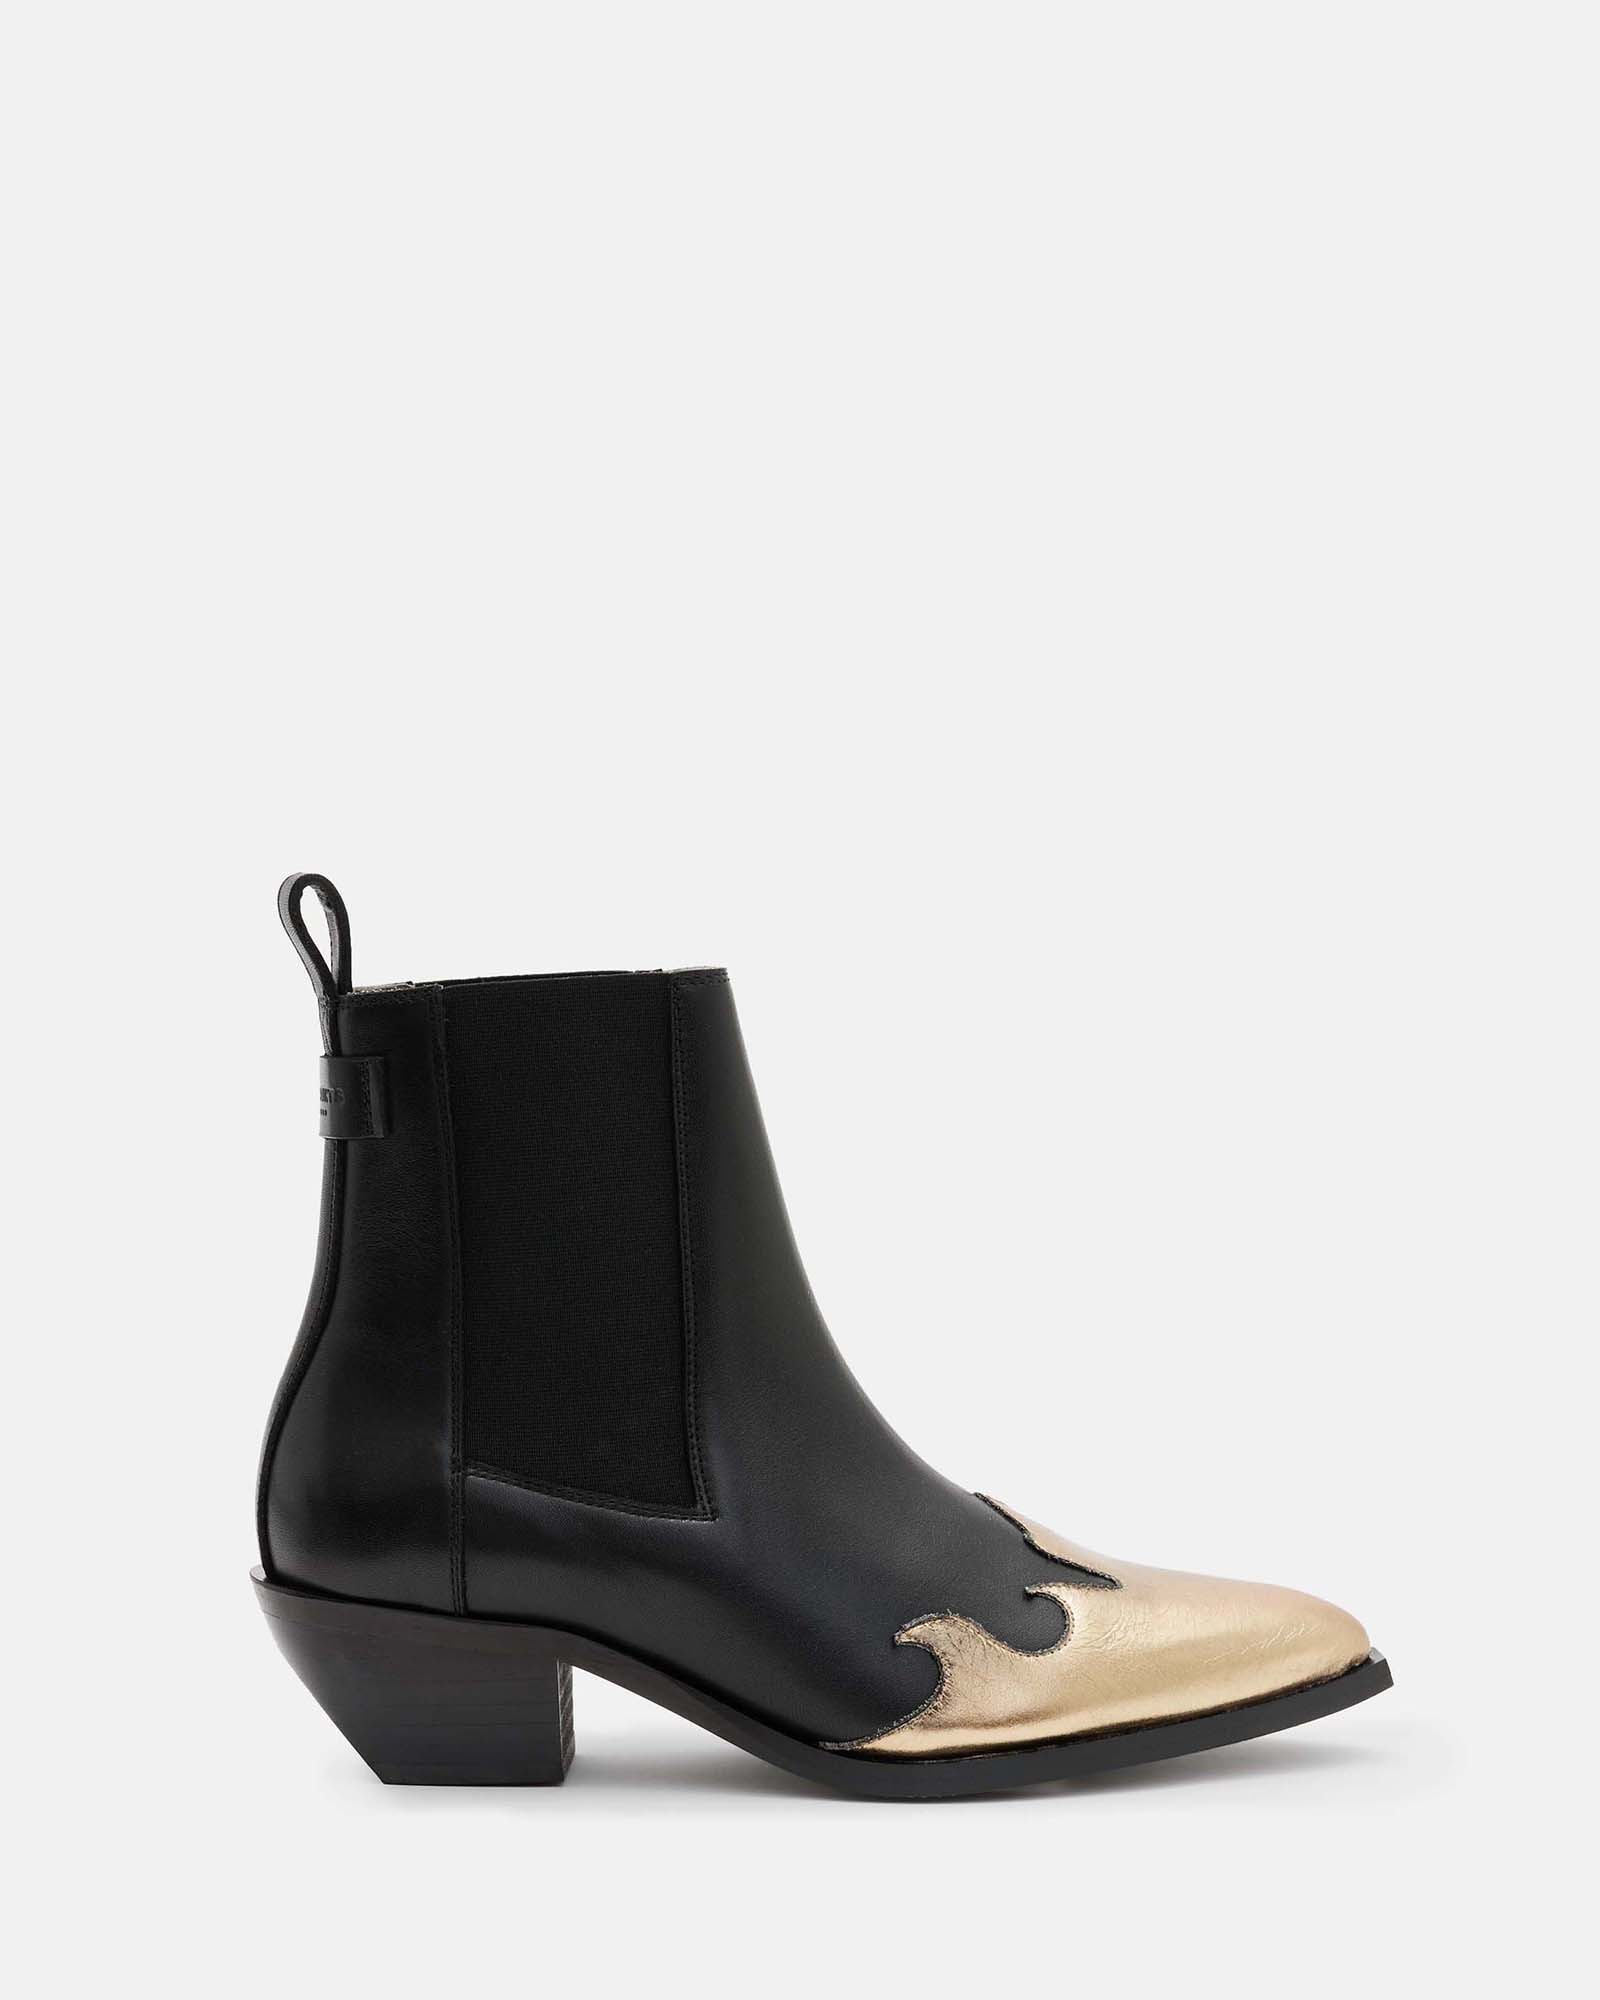 Dellaware Pointed Leather Western Boots BLACK/GOLD | ALLSAINTS Canada